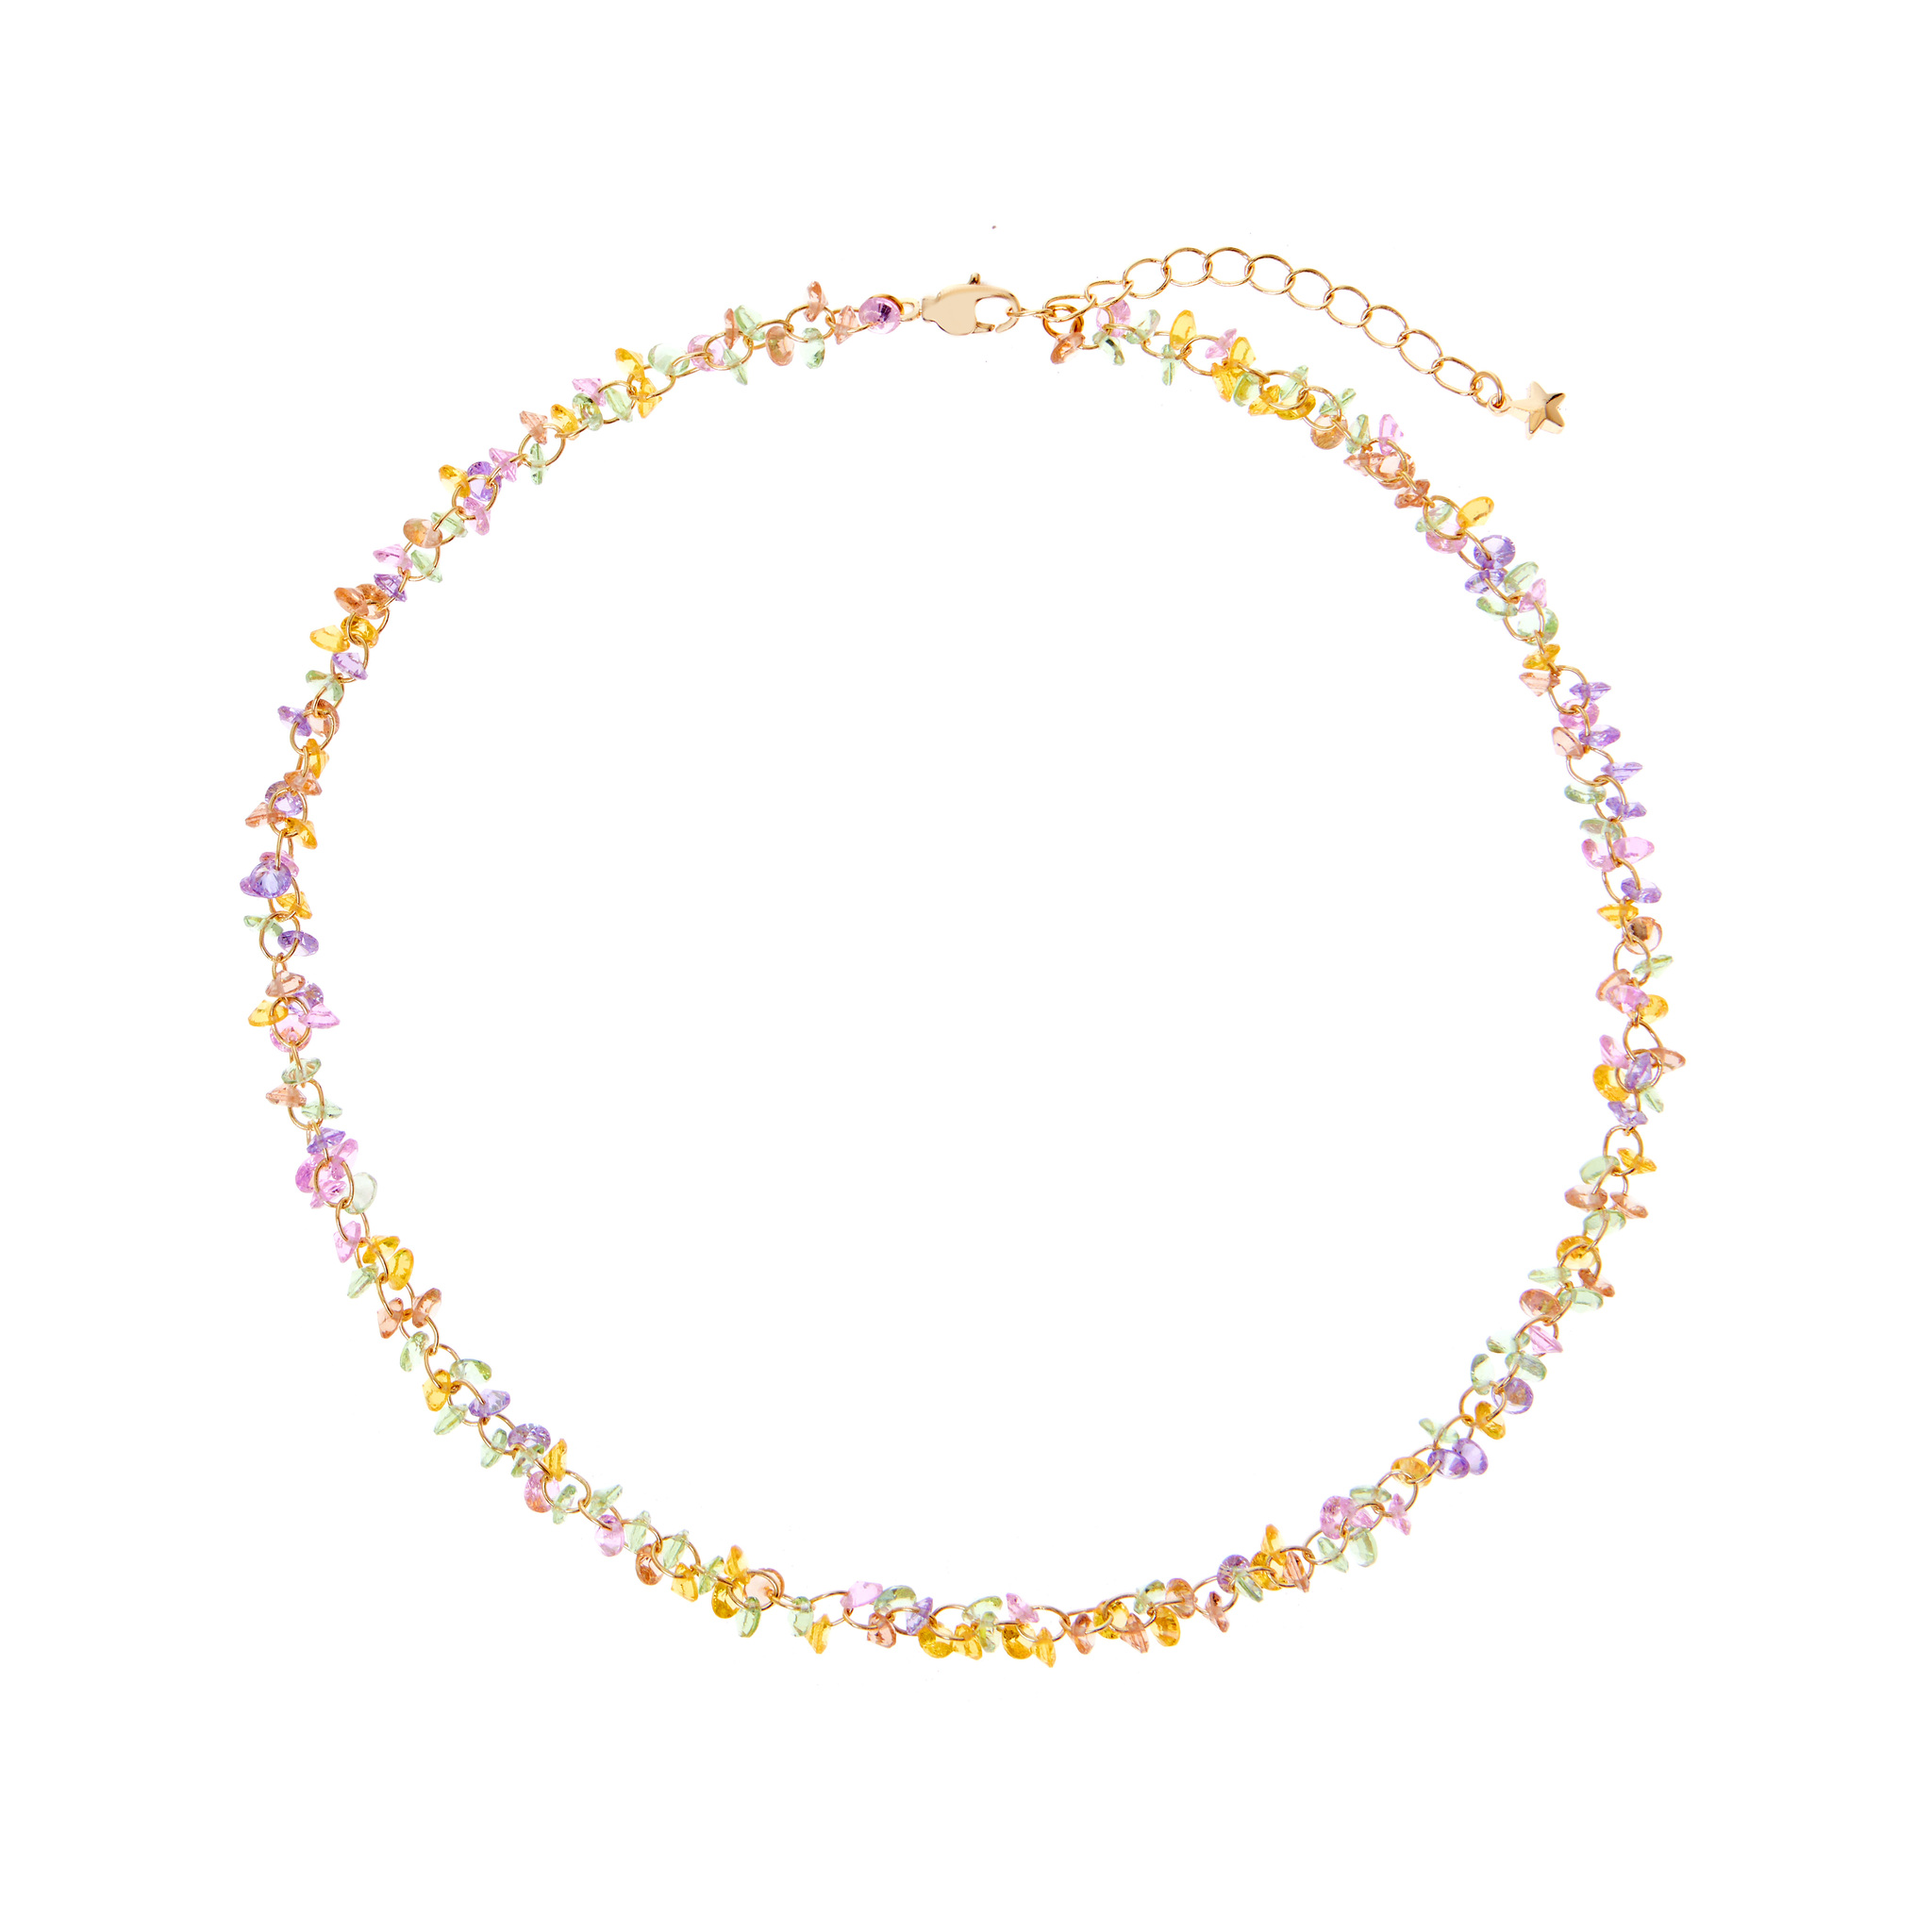 HOLLY JUNE Колье Pretty Shatters Necklace – Gold колье holly june gold saturn necklace 1 шт